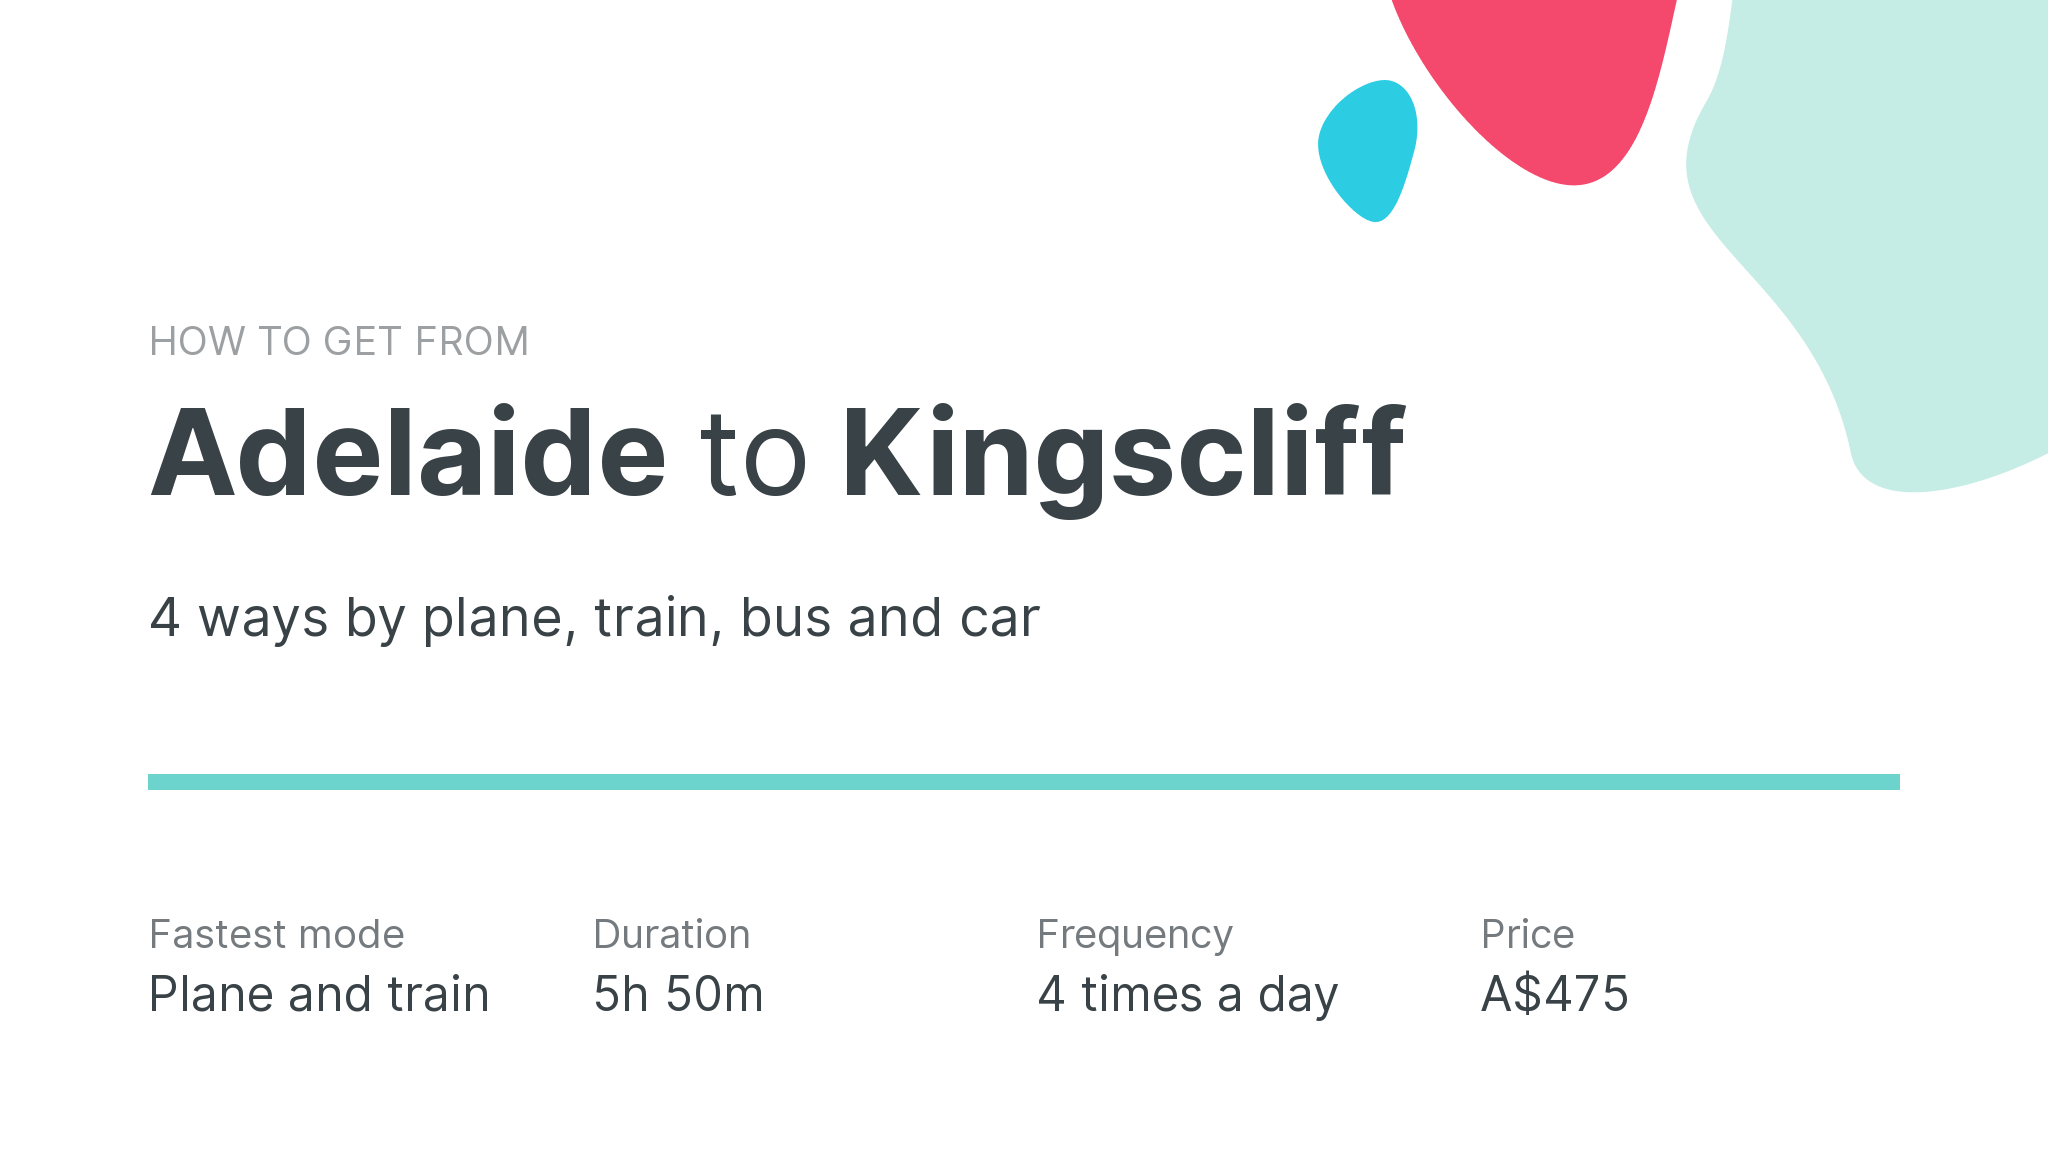 How do I get from Adelaide to Kingscliff